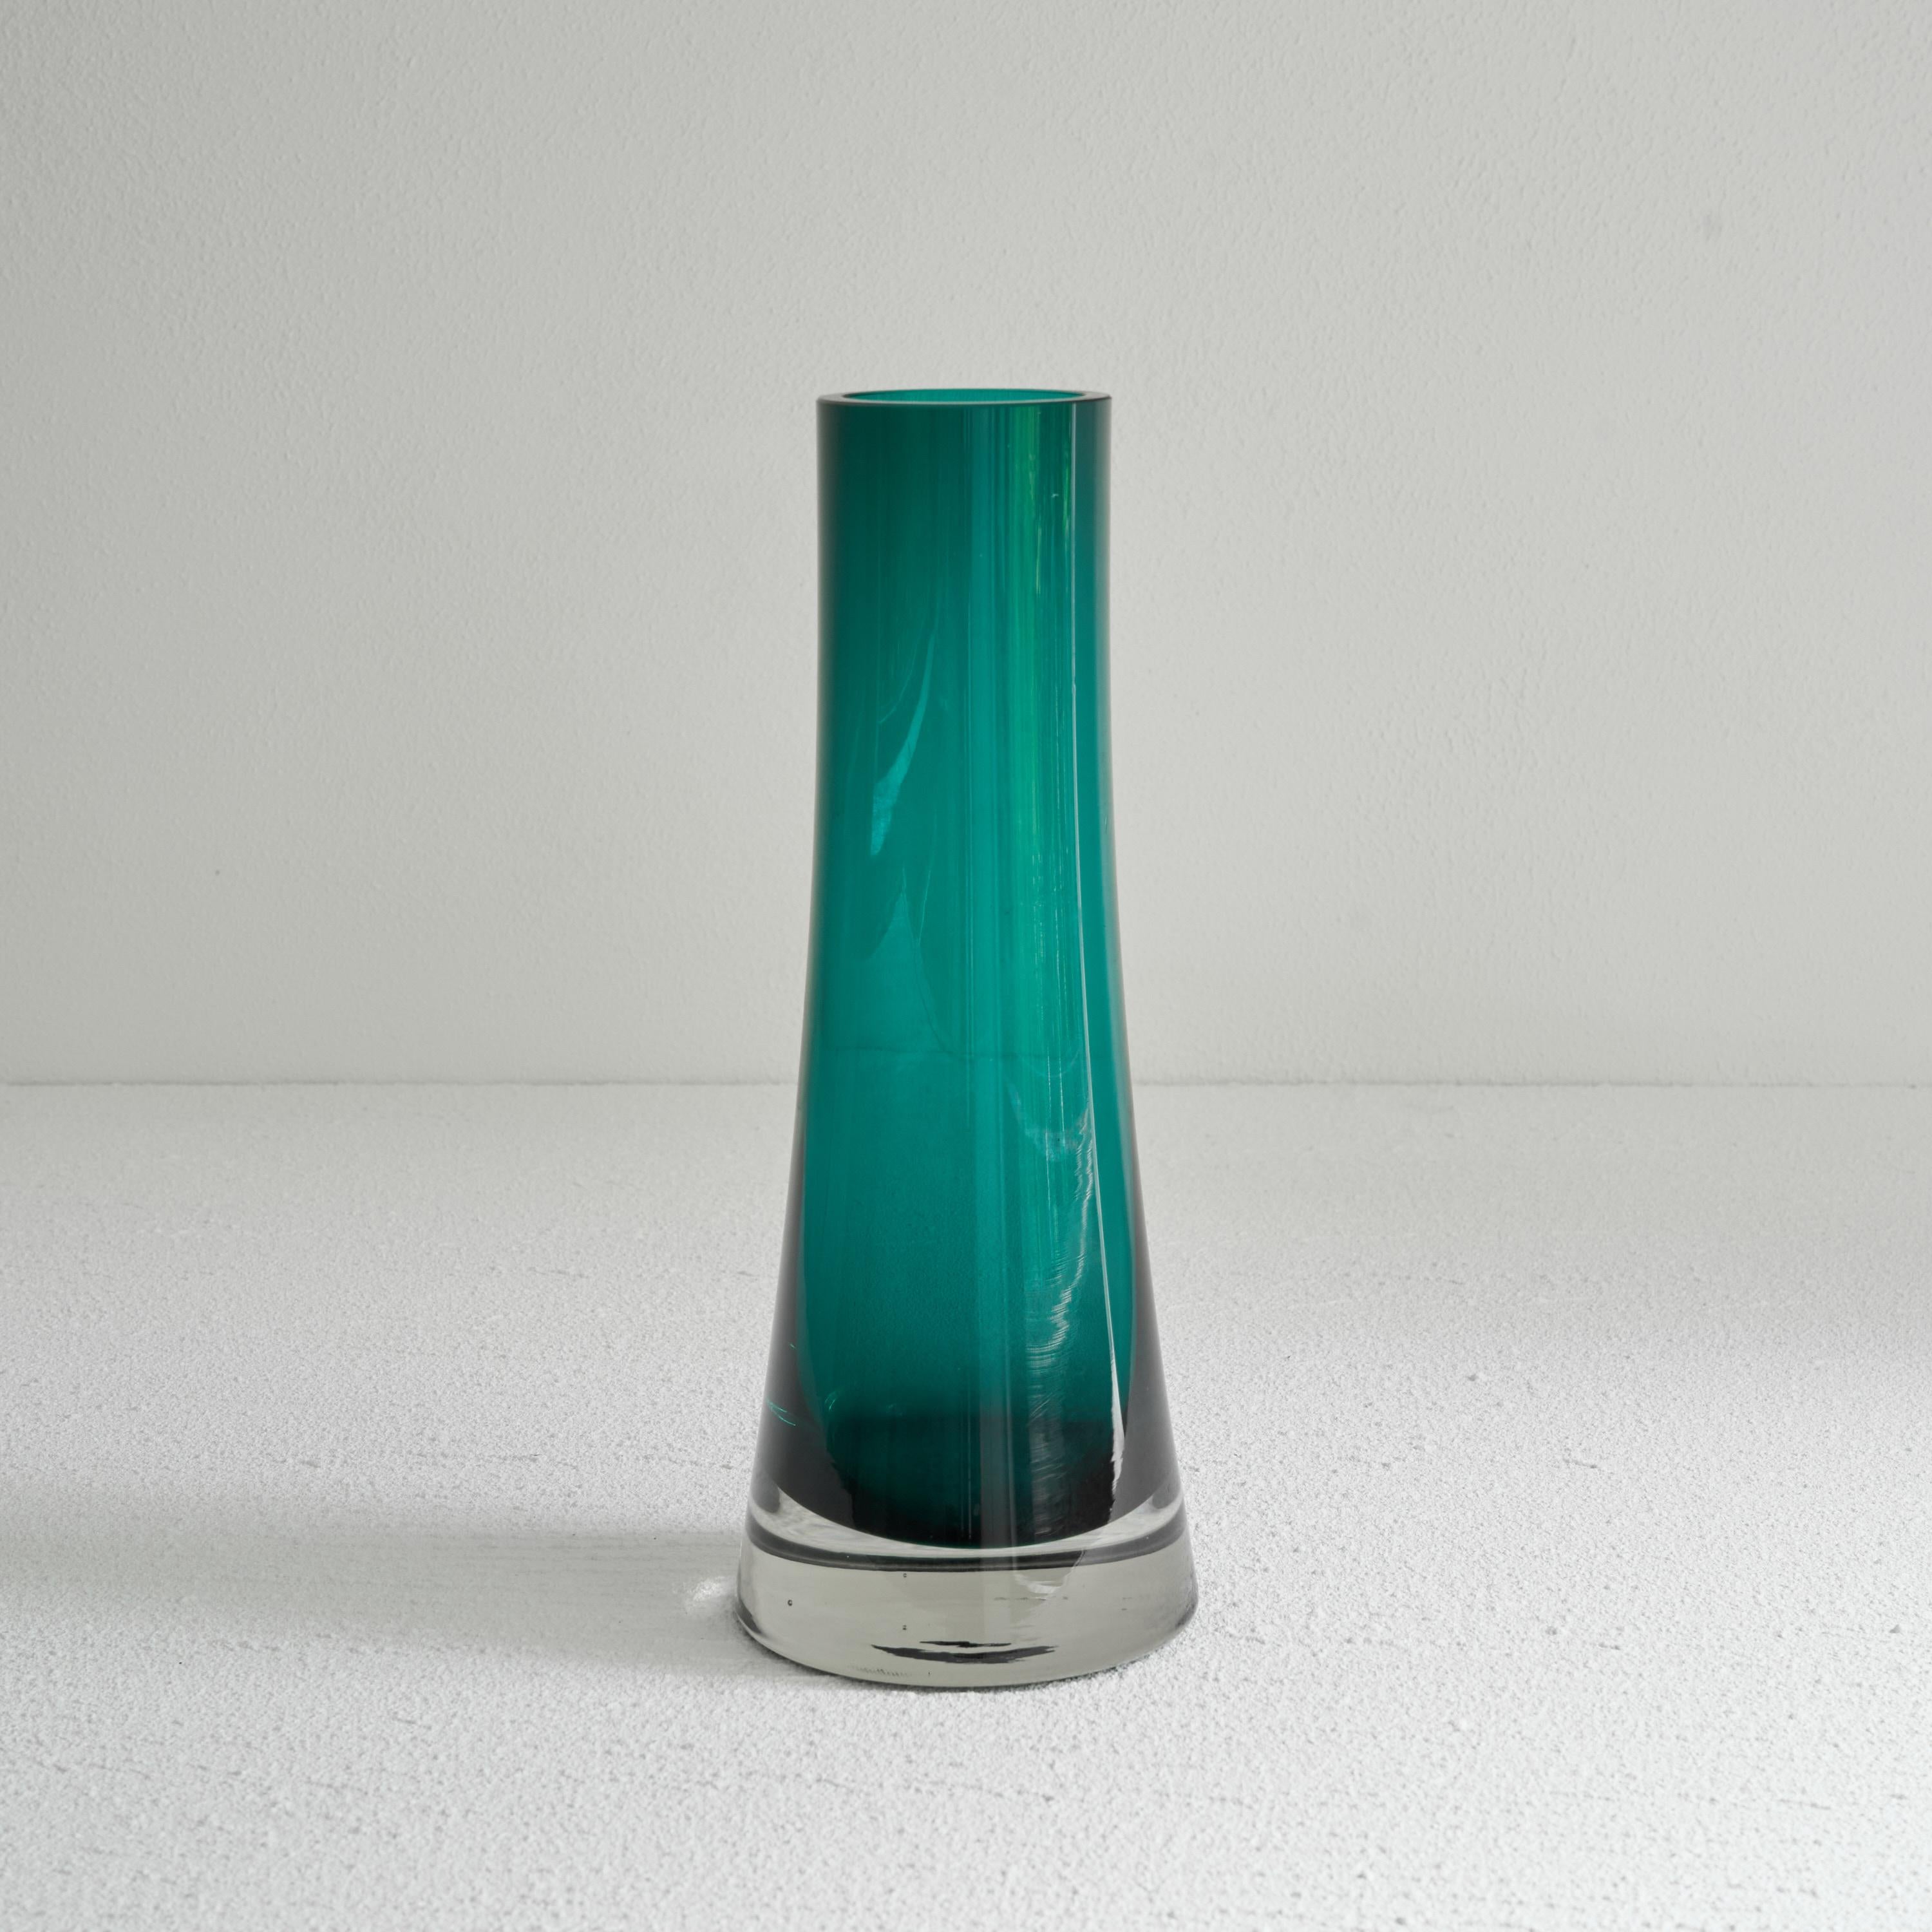 Hand-Crafted Riihimäen Lasi Oy Tall Modernist Glass Vase For Sale